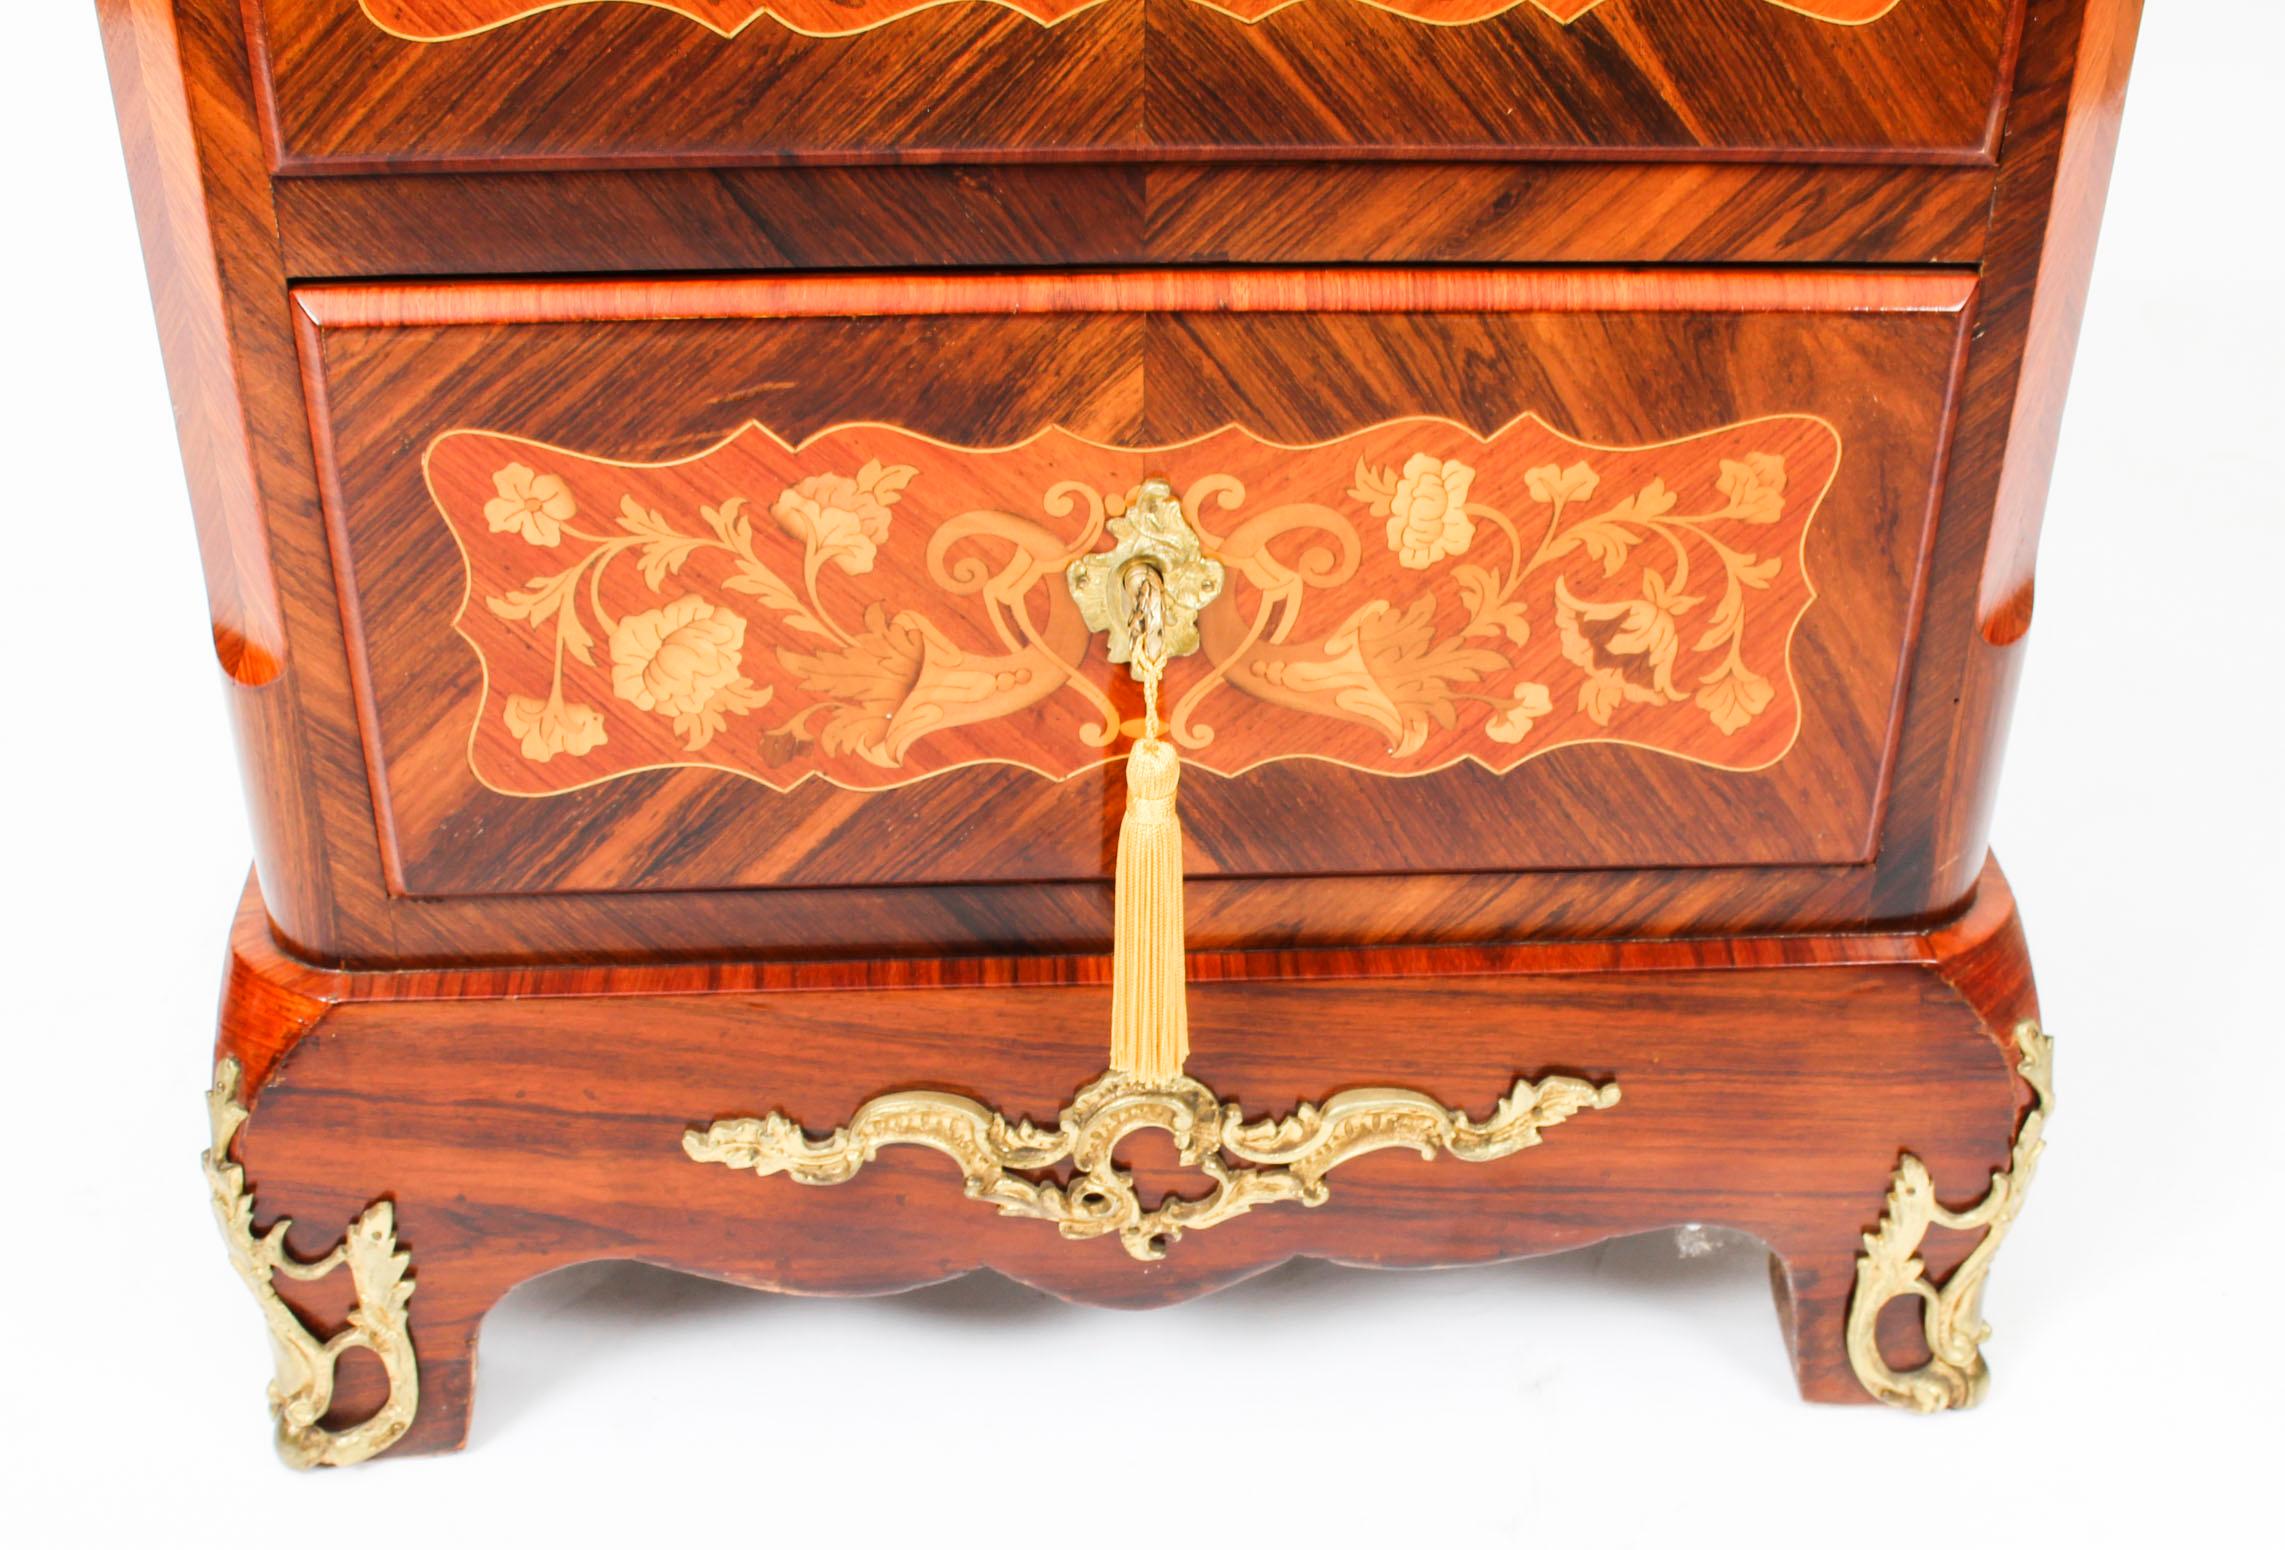 Mid-19th Century 19th Century French Ormolu Mounted Marquetry Secretaire Chest